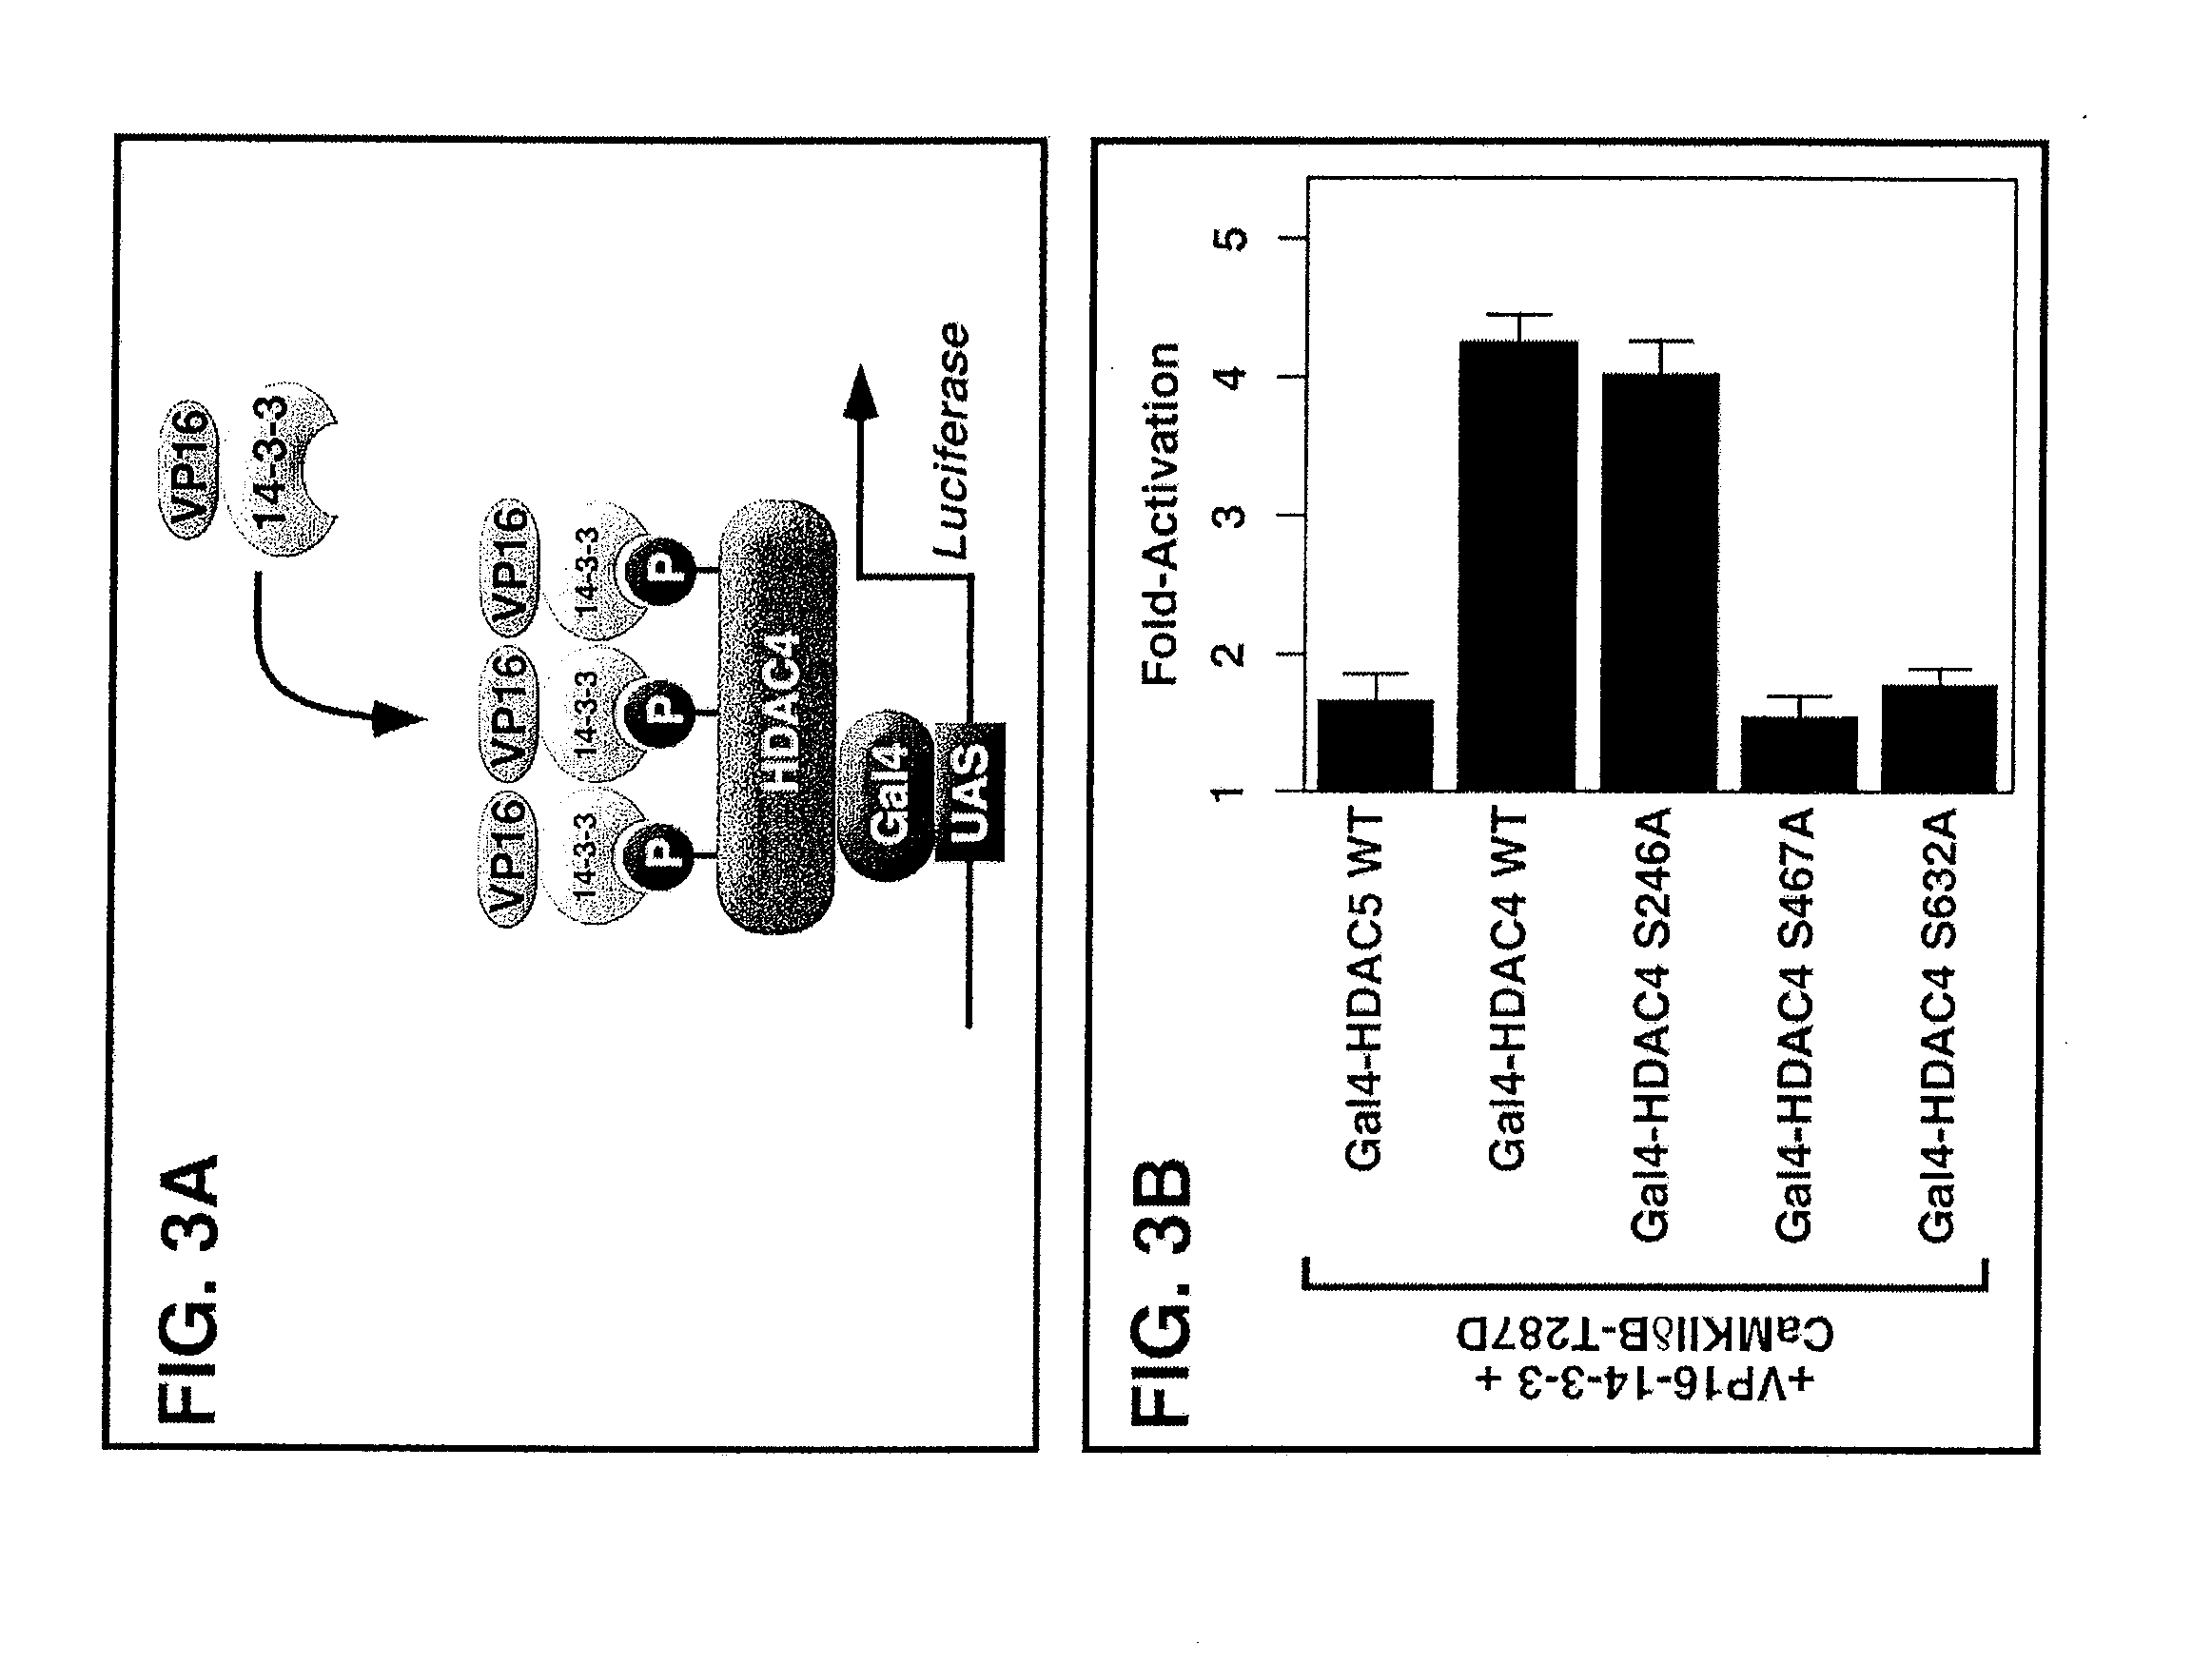 Methods of Treatment and Uses for CaMKII and Its Interaction with HDACs and Calpain